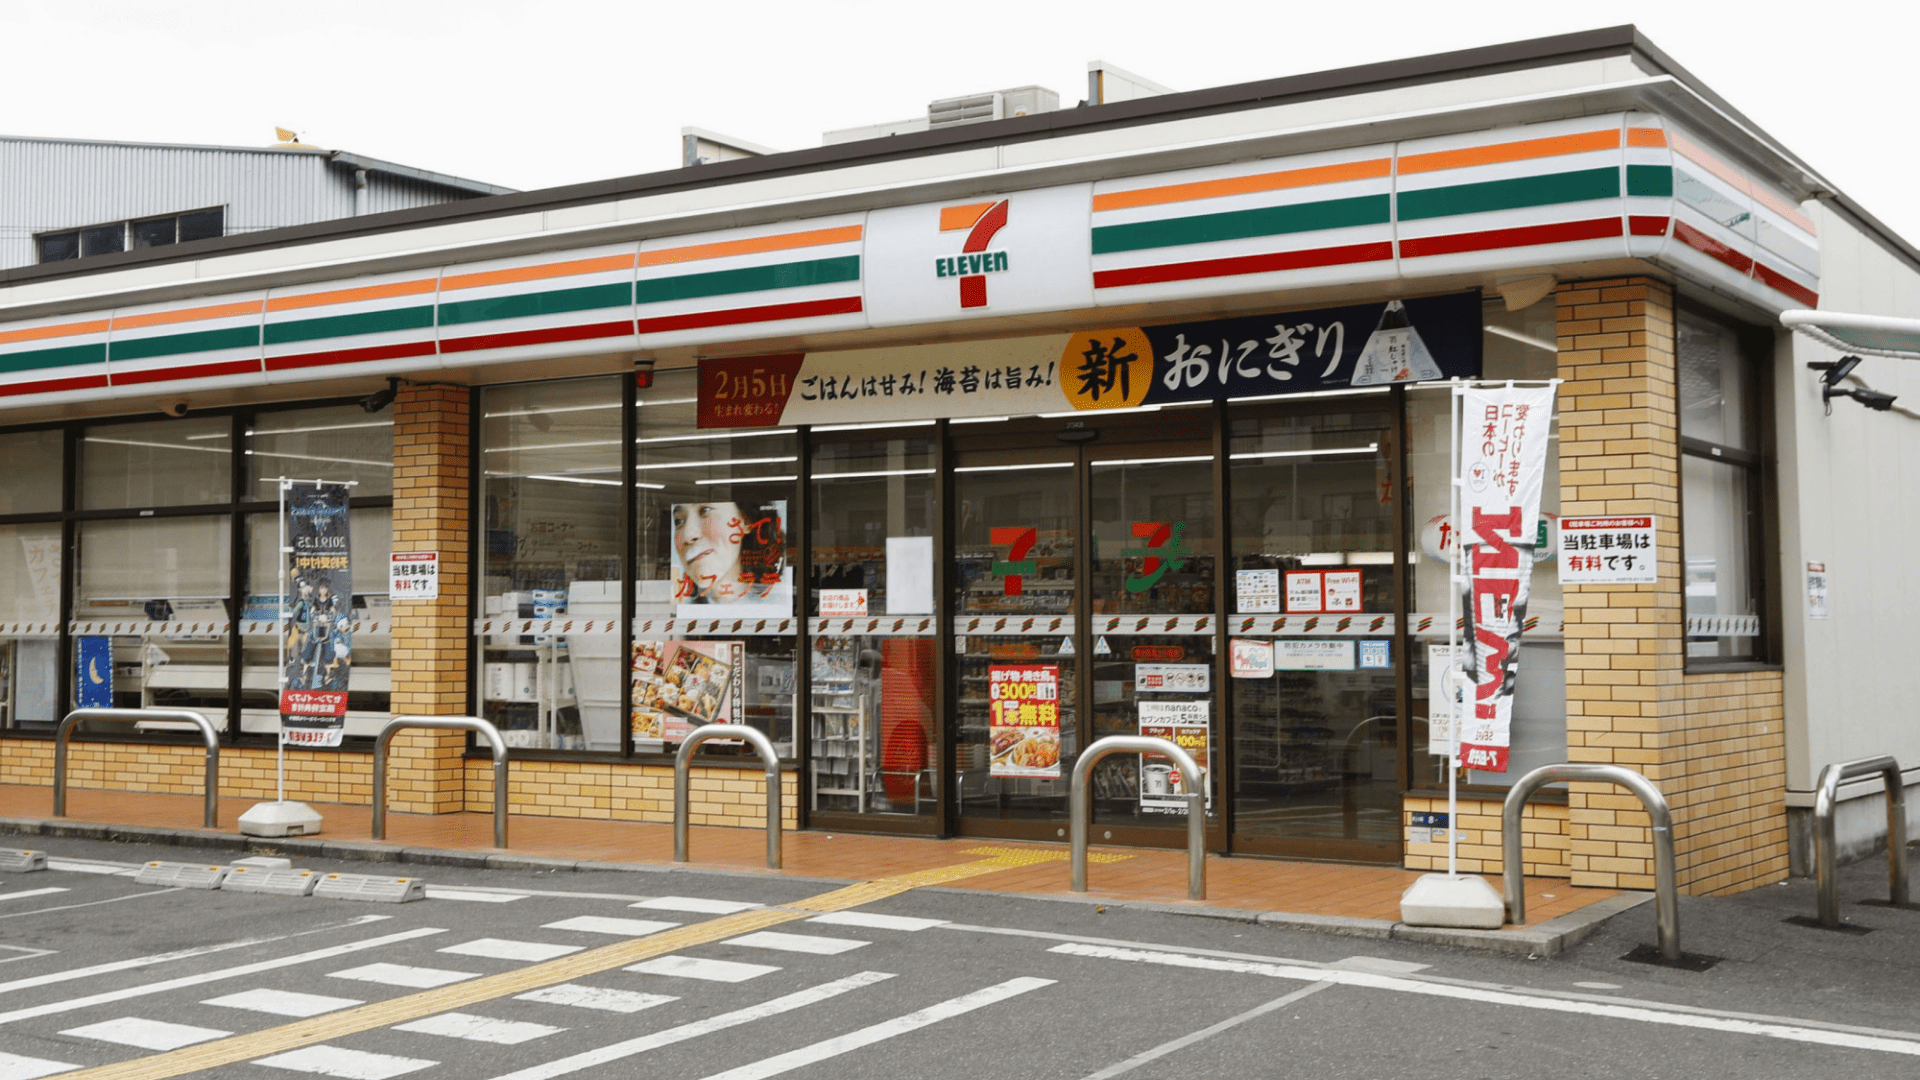 When in Tokyo, forget everything you know about 7-Elevens and convenience stores